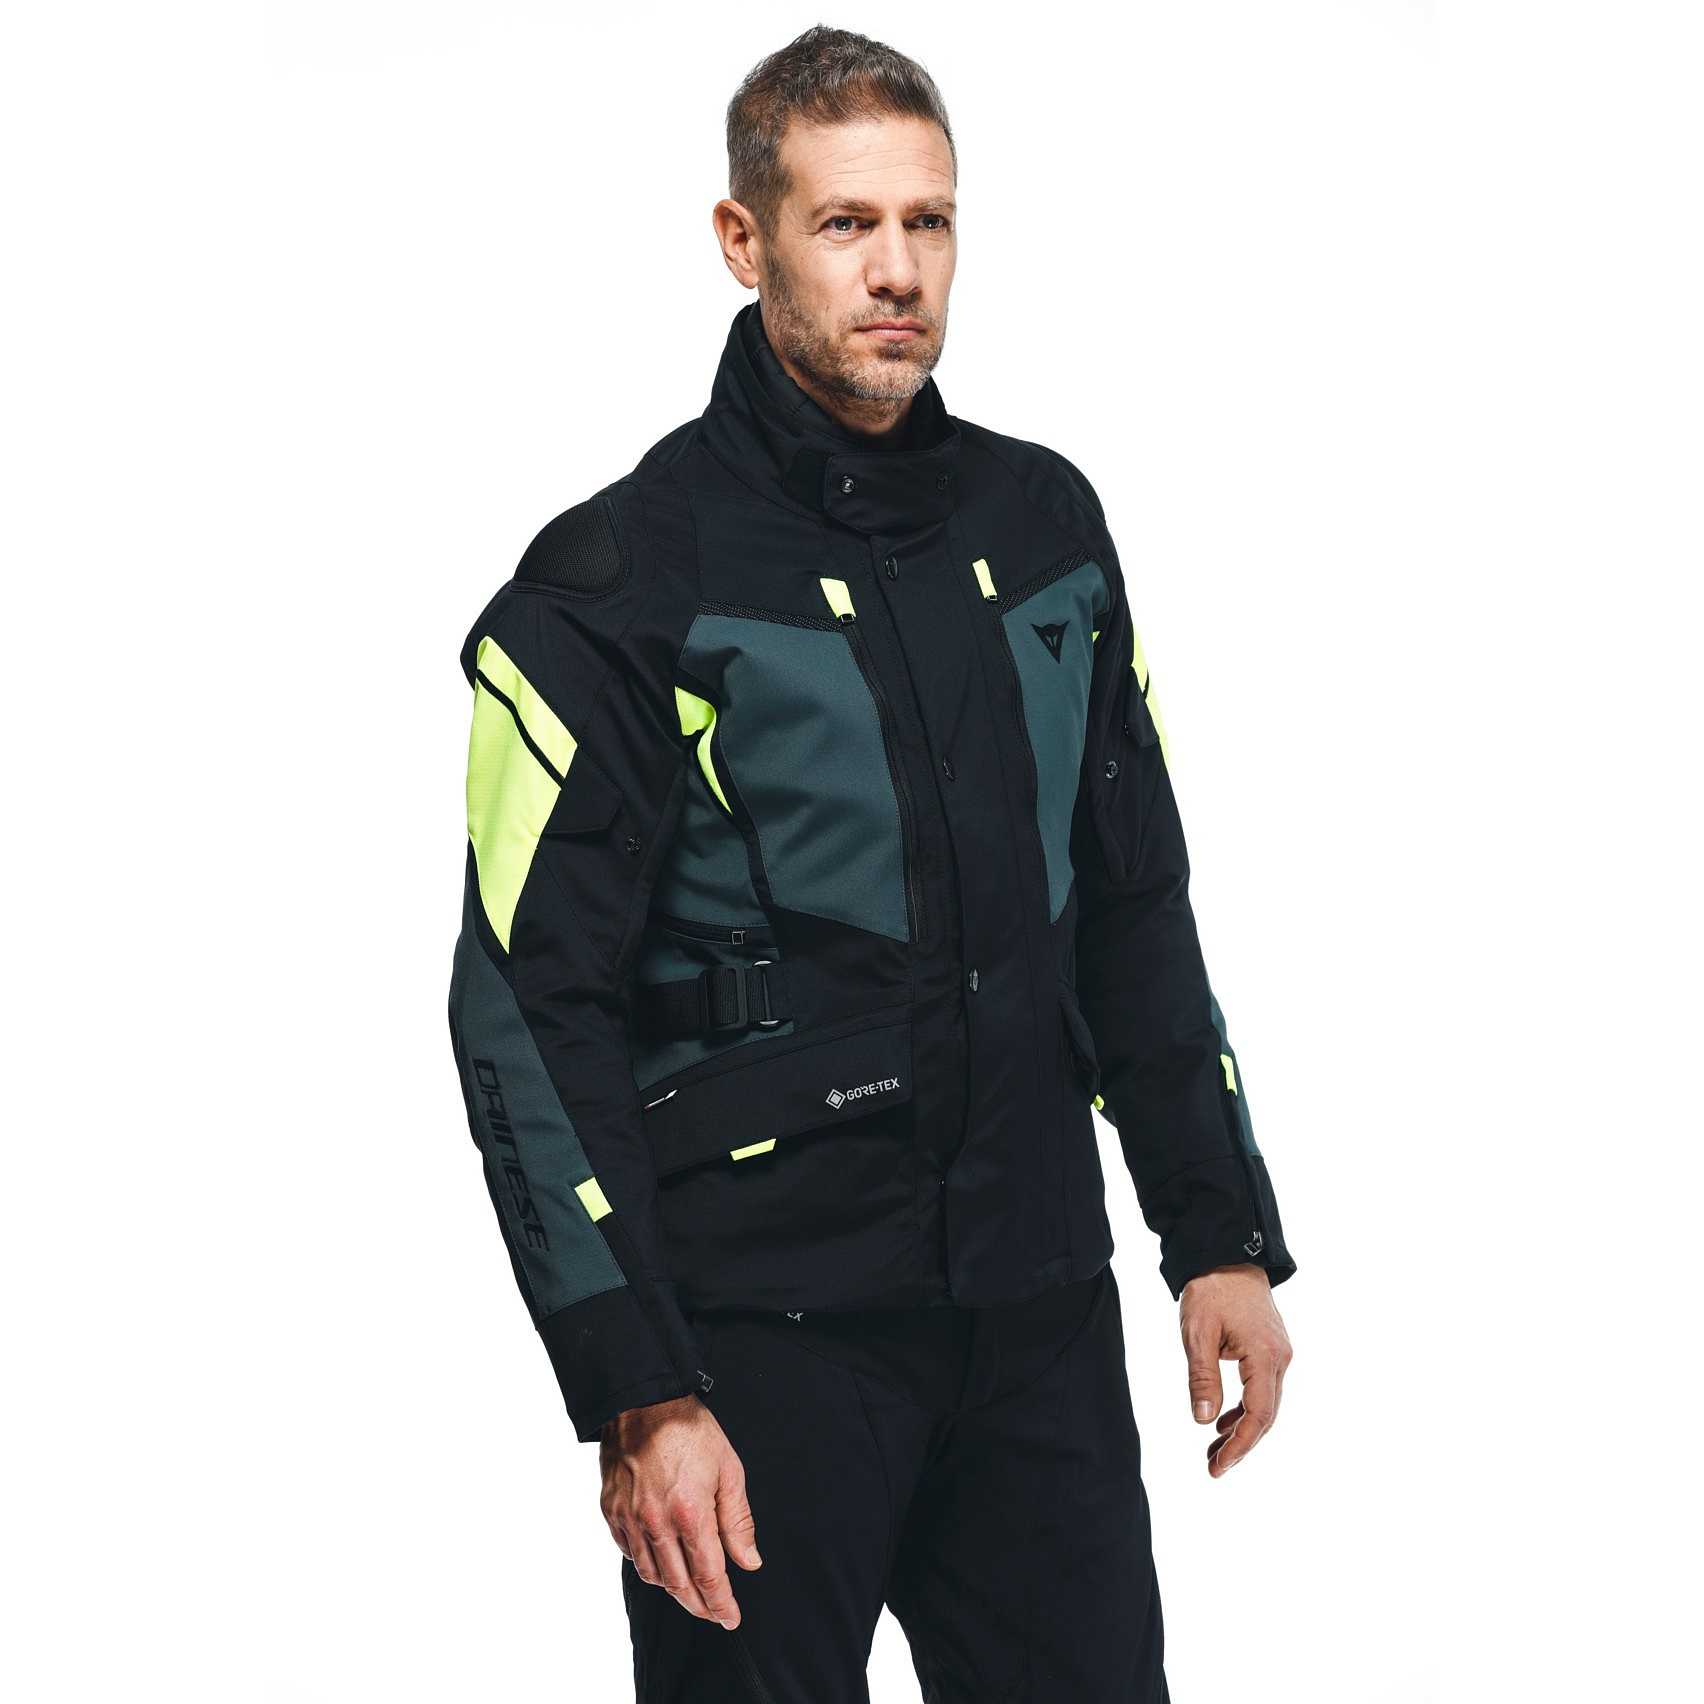 Dainese CARVE MASTER 3 Gore-Tex Jacket Black Ebony Yellow Fluo For